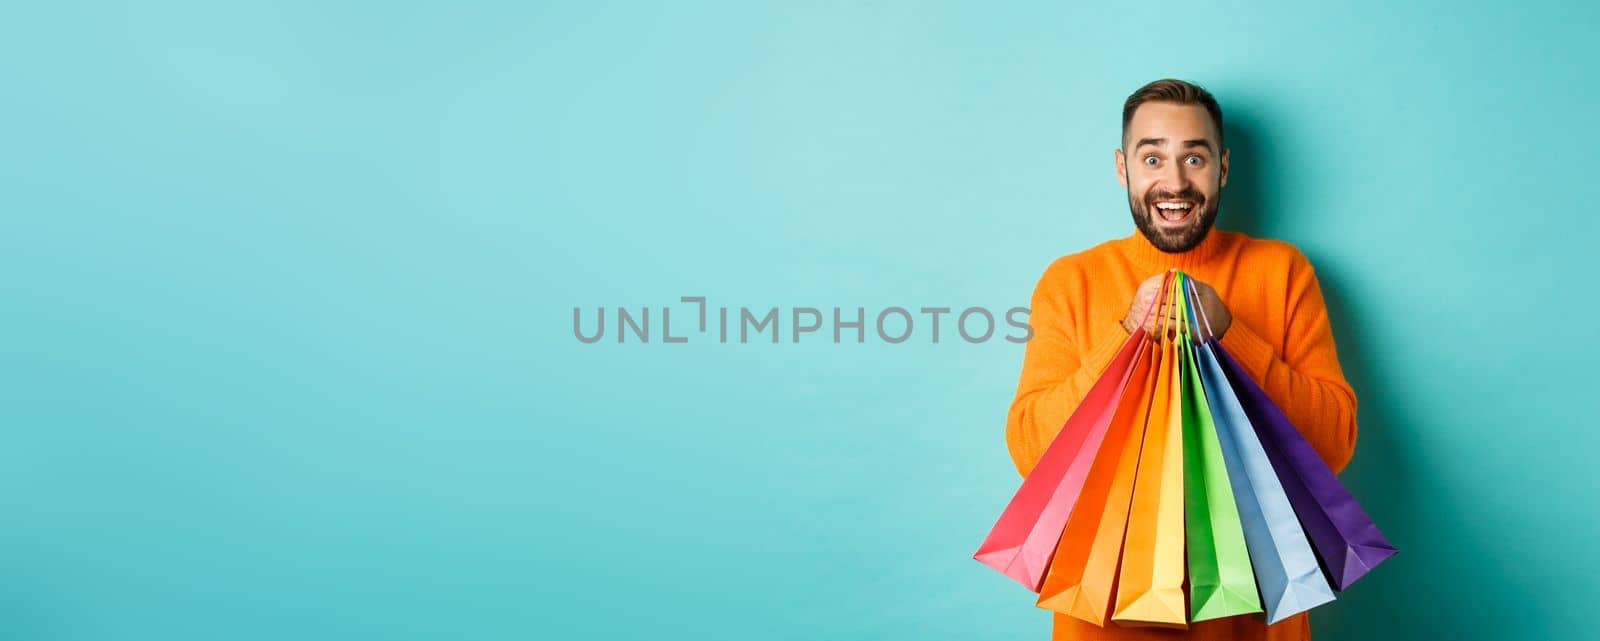 Excited adult man holding shopping bags and smiling, going to mall, standing over turquoise background.